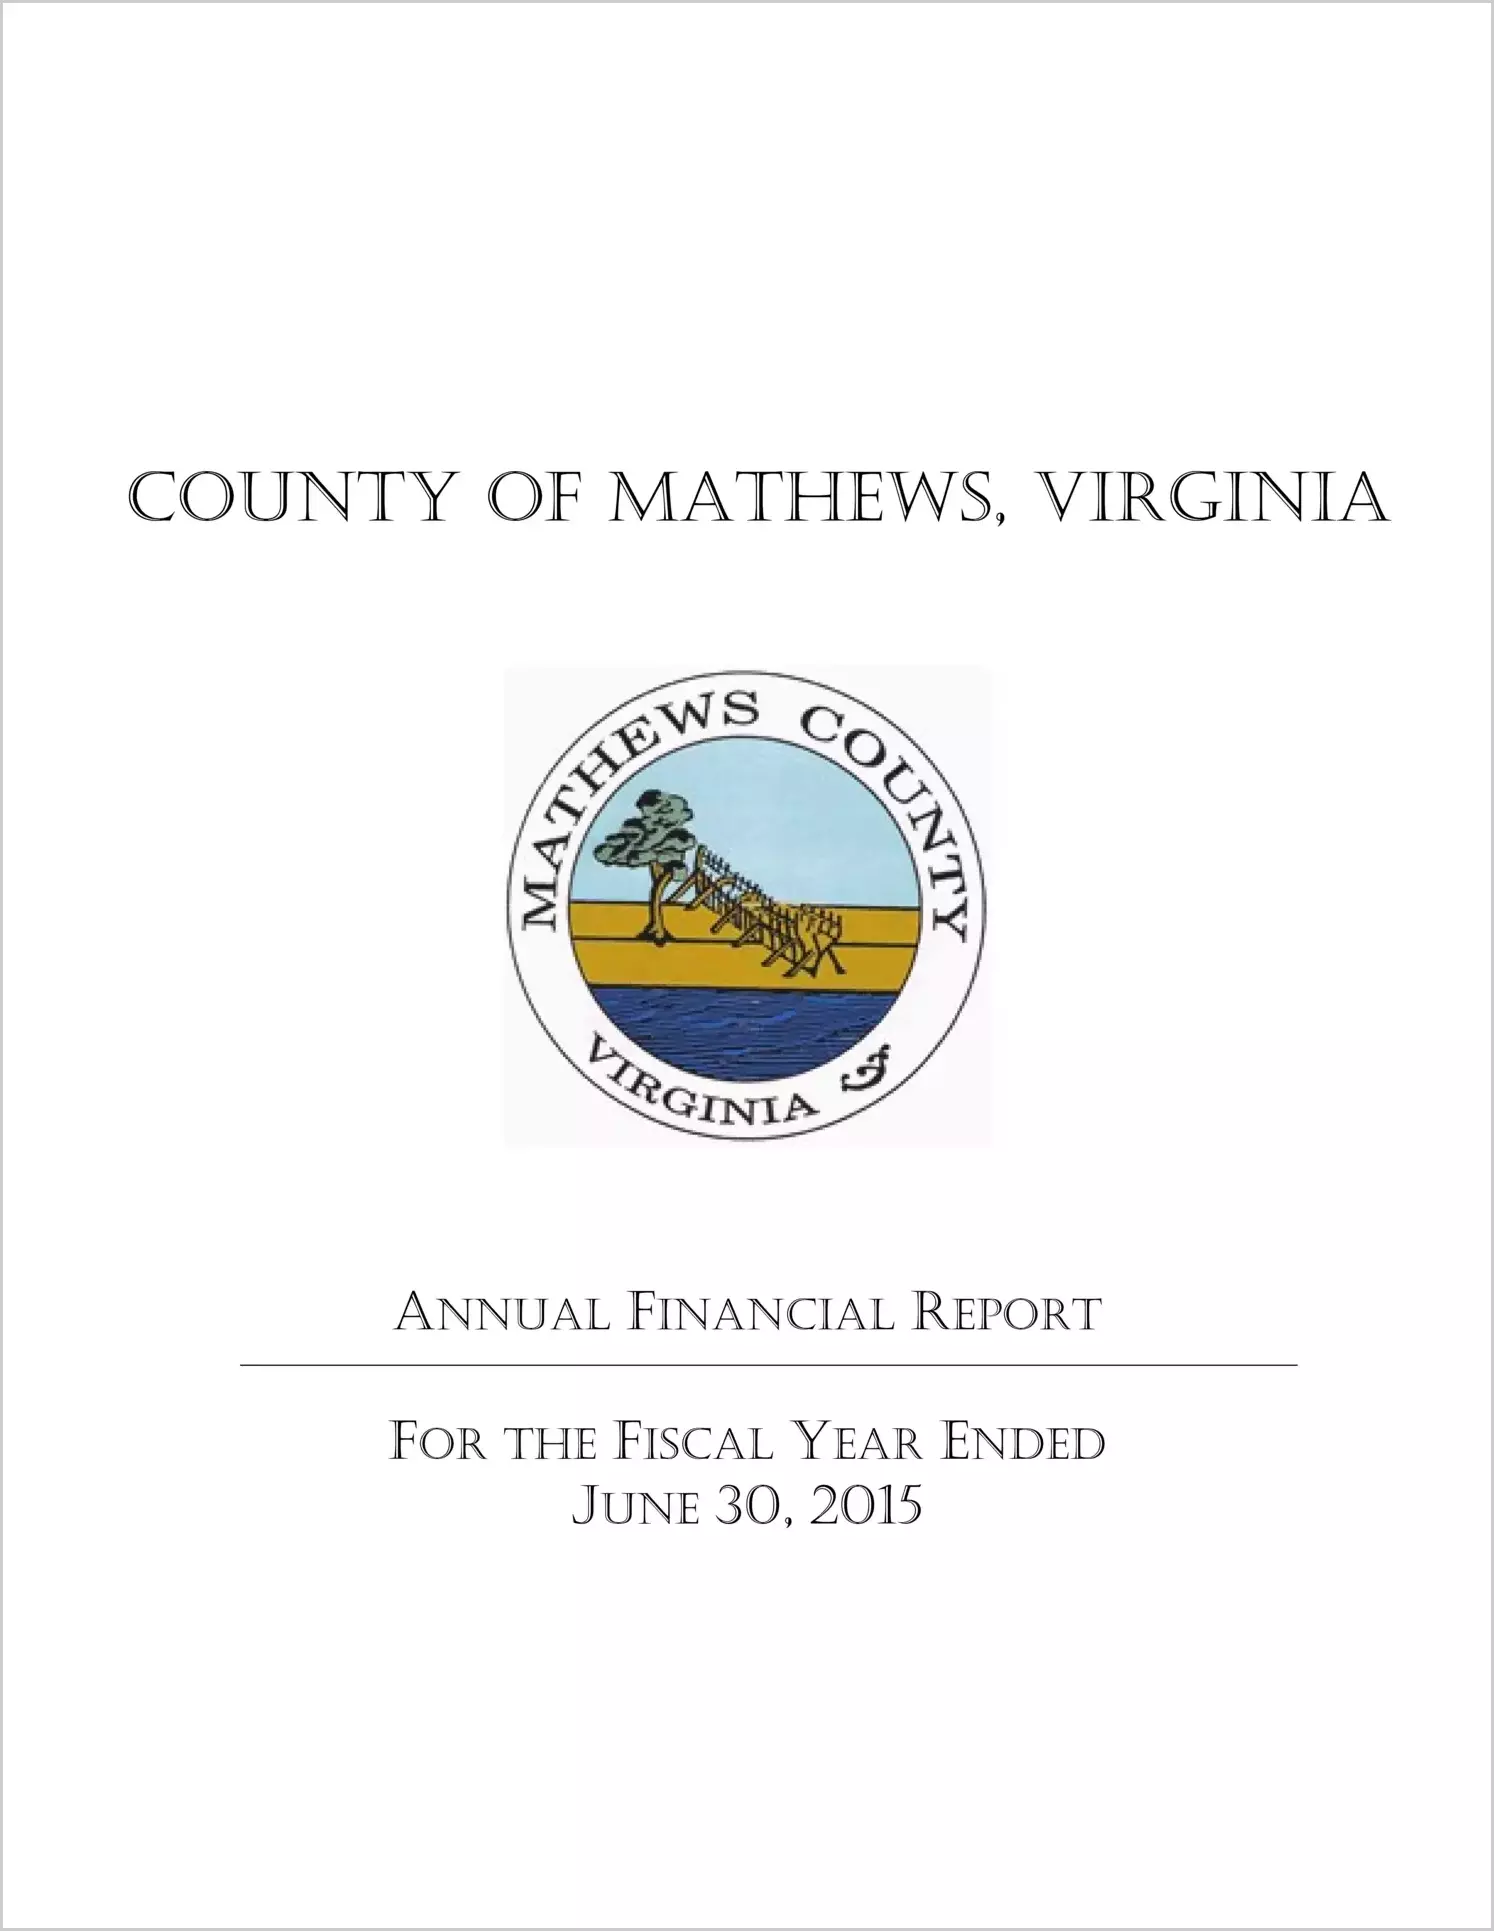 2015 Annual Financial Report for County of Mathews